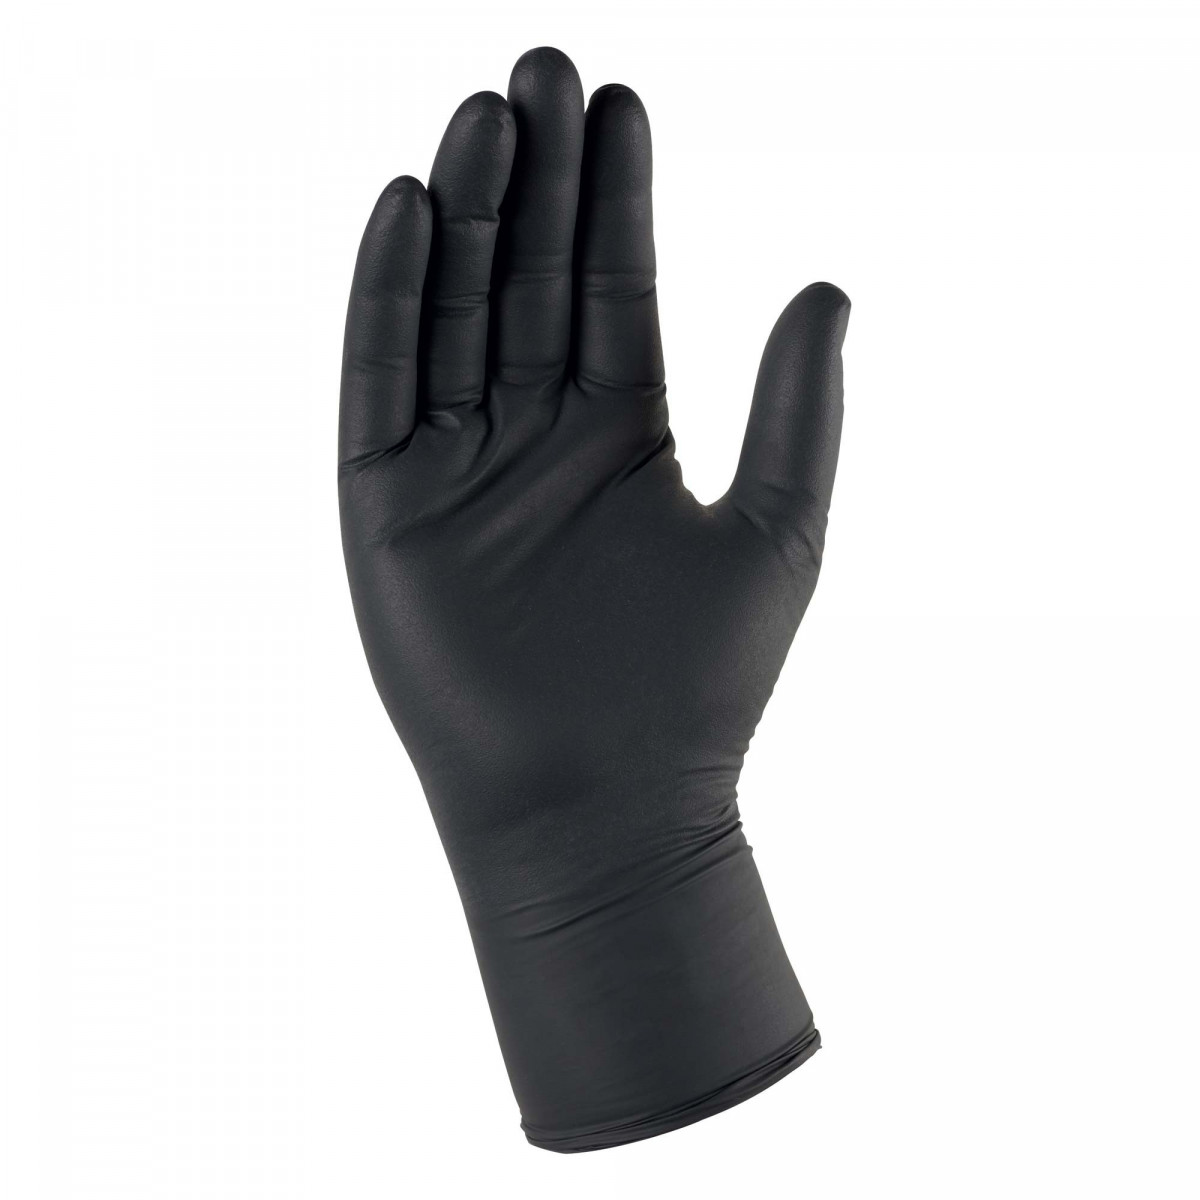 GANTS NITRILE NOIRS (X100) - Youth Detailing - Youth Detailing